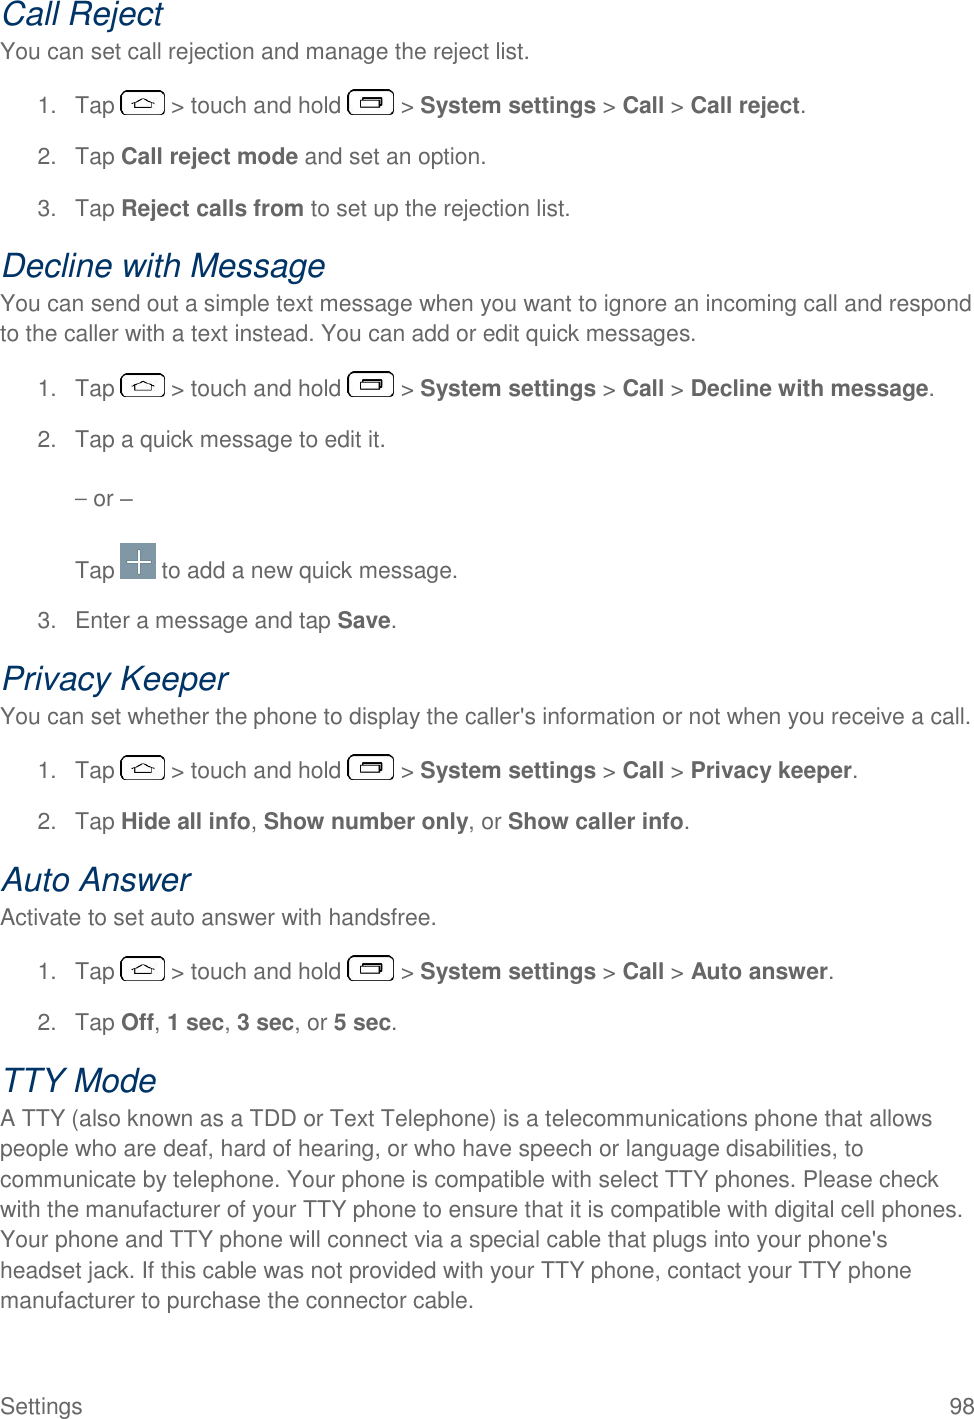  Settings  98 Call Reject You can set call rejection and manage the reject list. 1.  Tap   &gt; touch and hold   &gt; System settings &gt; Call &gt; Call reject. 2.  Tap Call reject mode and set an option. 3.  Tap Reject calls from to set up the rejection list. Decline with Message You can send out a simple text message when you want to ignore an incoming call and respond to the caller with a text instead. You can add or edit quick messages. 1.  Tap   &gt; touch and hold   &gt; System settings &gt; Call &gt; Decline with message. 2.  Tap a quick message to edit it. – or – Tap   to add a new quick message. 3.  Enter a message and tap Save. Privacy Keeper You can set whether the phone to display the caller&apos;s information or not when you receive a call. 1.  Tap   &gt; touch and hold   &gt; System settings &gt; Call &gt; Privacy keeper. 2.  Tap Hide all info, Show number only, or Show caller info. Auto Answer Activate to set auto answer with handsfree. 1.  Tap   &gt; touch and hold   &gt; System settings &gt; Call &gt; Auto answer. 2.  Tap Off, 1 sec, 3 sec, or 5 sec. TTY Mode A TTY (also known as a TDD or Text Telephone) is a telecommunications phone that allows people who are deaf, hard of hearing, or who have speech or language disabilities, to communicate by telephone. Your phone is compatible with select TTY phones. Please check with the manufacturer of your TTY phone to ensure that it is compatible with digital cell phones. Your phone and TTY phone will connect via a special cable that plugs into your phone&apos;s headset jack. If this cable was not provided with your TTY phone, contact your TTY phone manufacturer to purchase the connector cable. 